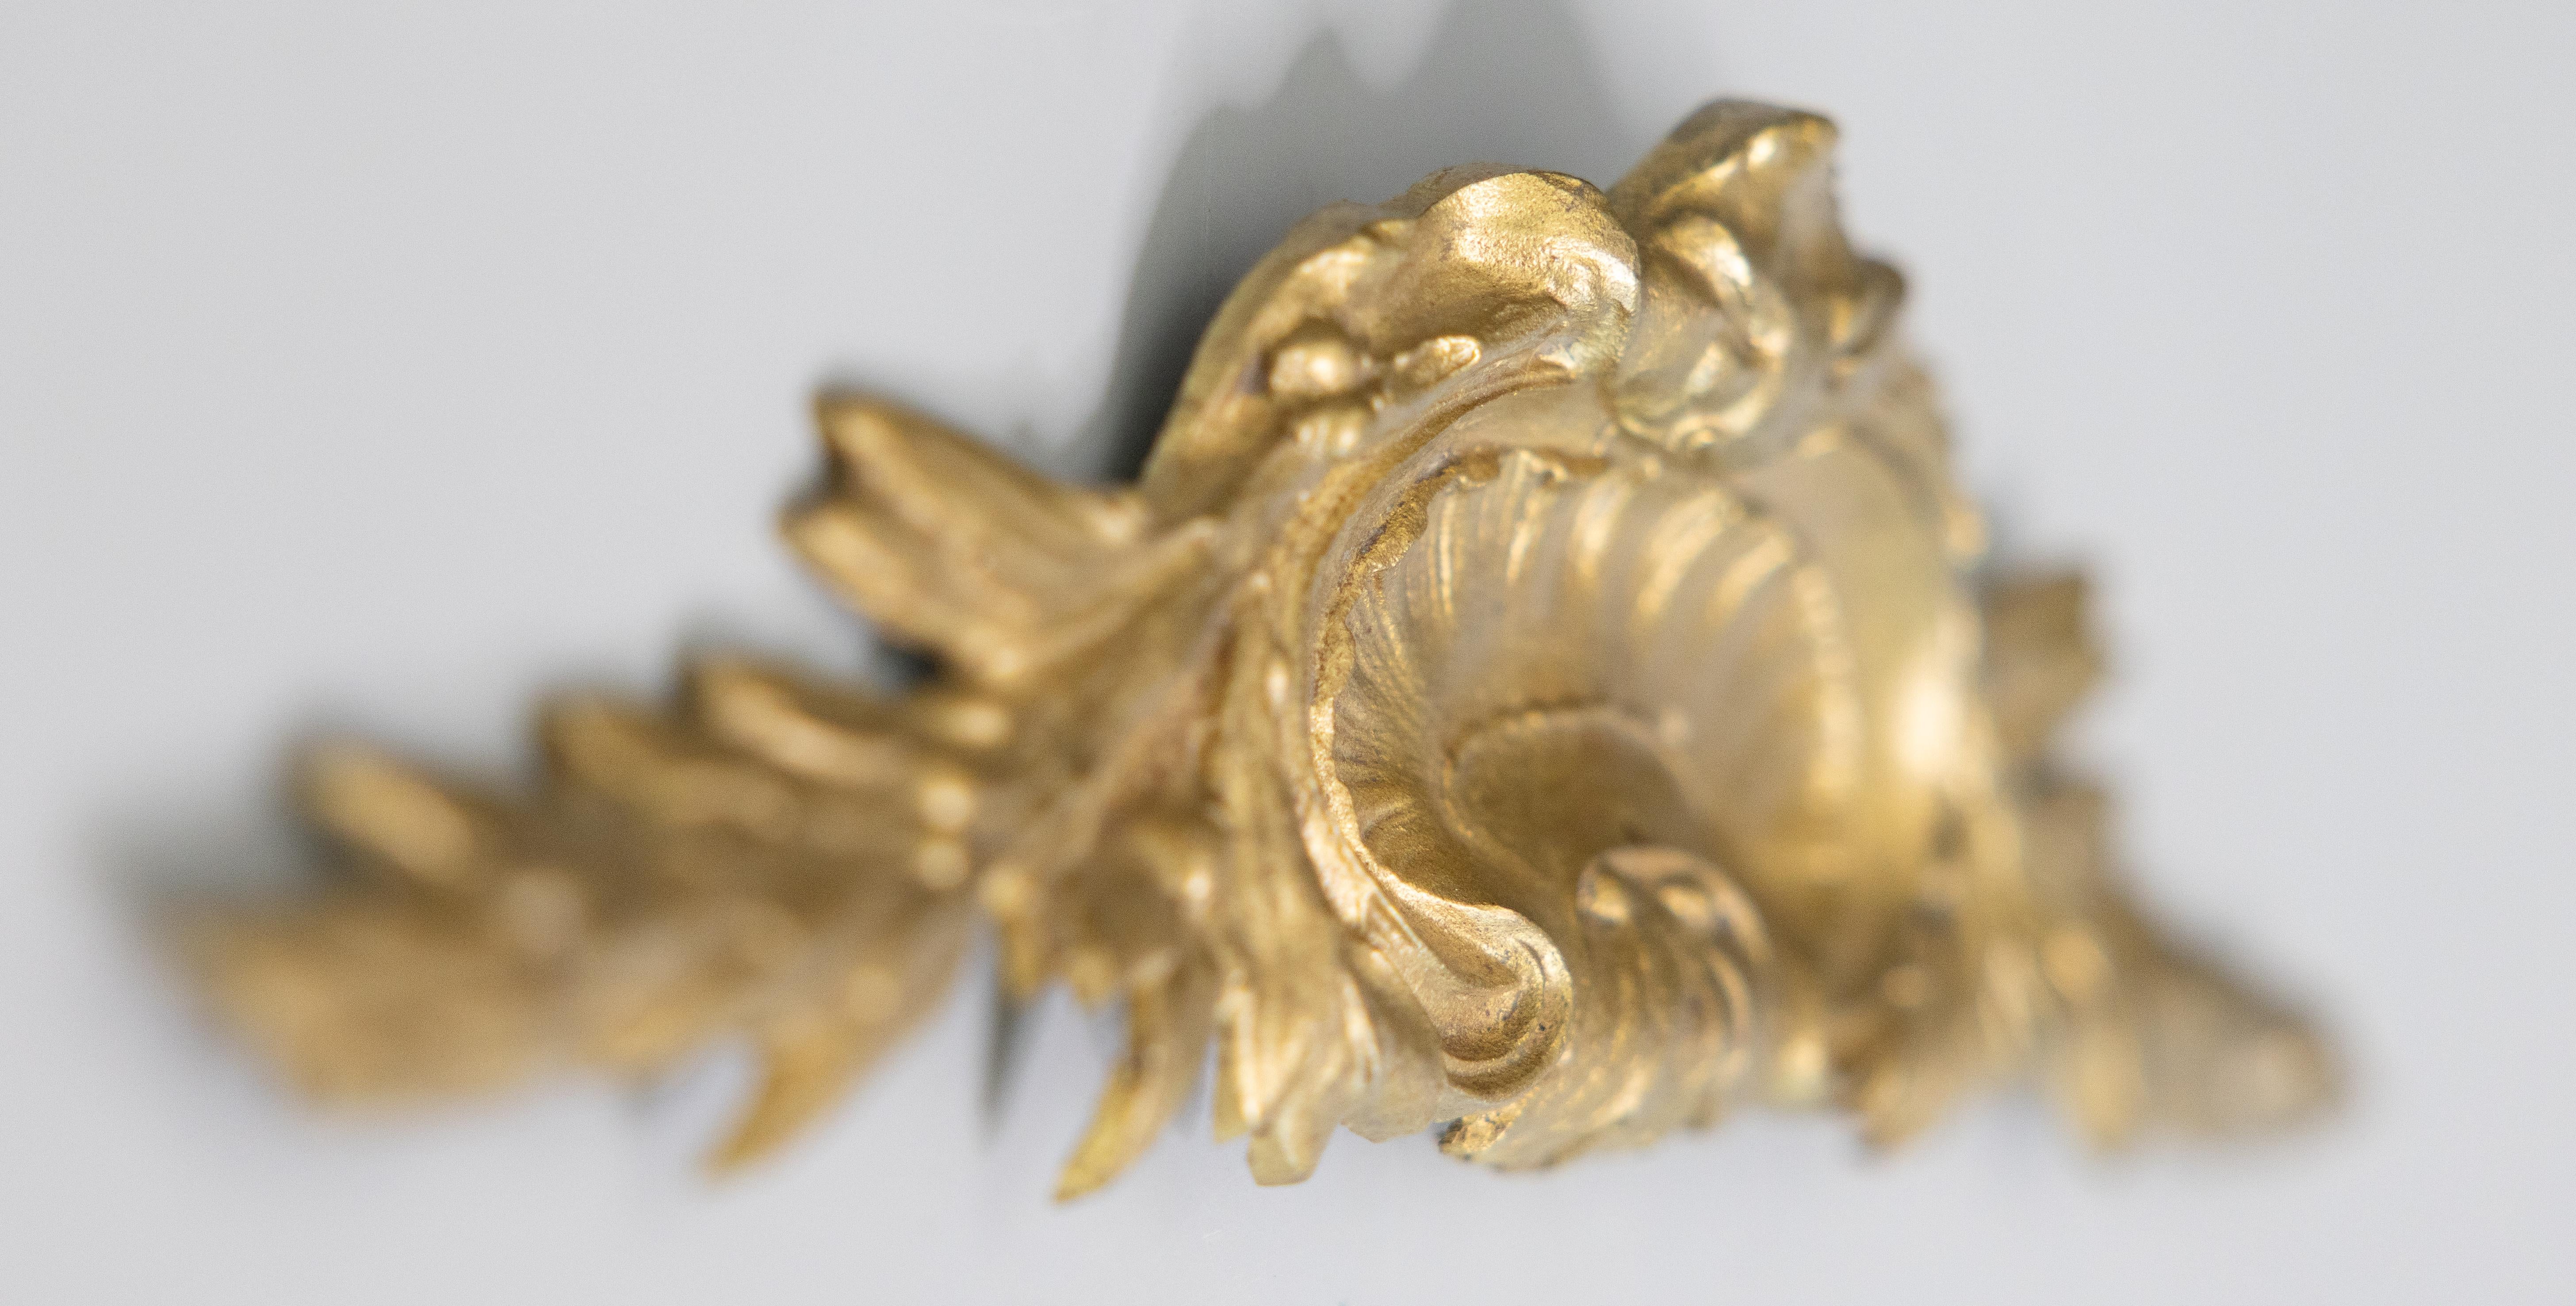 A gorgeous antique 19th-Century French Louis XVI style gilded cornice / applique /wall swag / ornament / hanging decor. This beautiful wall swag has a central shell surrounded by leaf garland in a lovely gilt patina and is the perfect accent piece